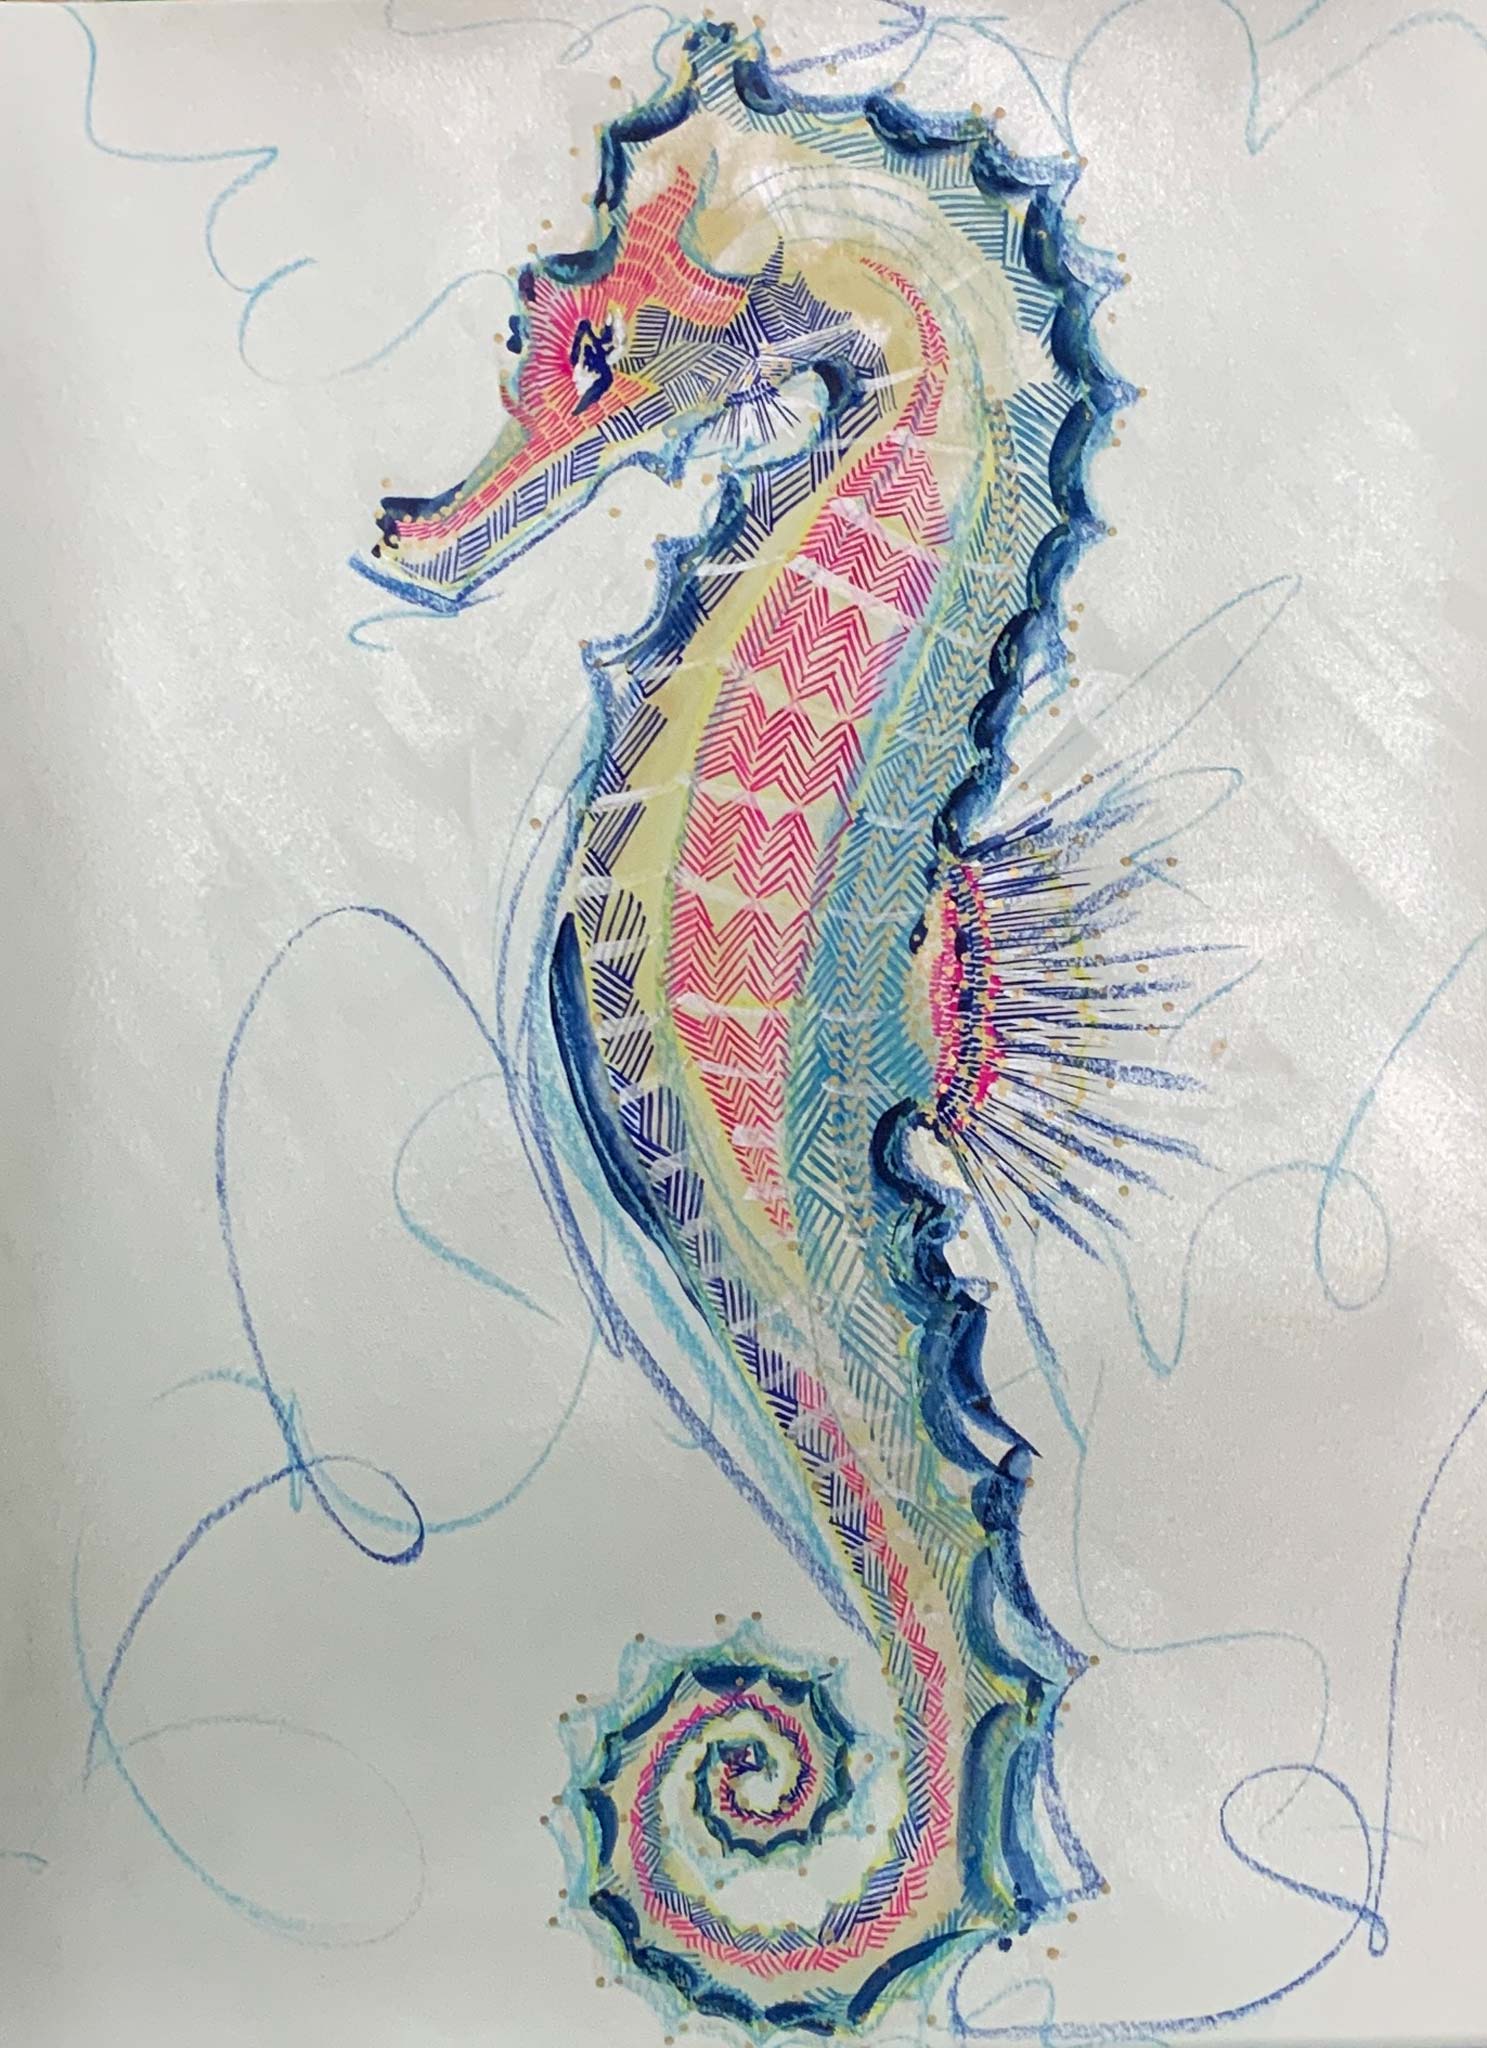 gouache, singular subject sea horse in blues, pinks, gold, white ground, bold lines, layered lines create form, graphic style